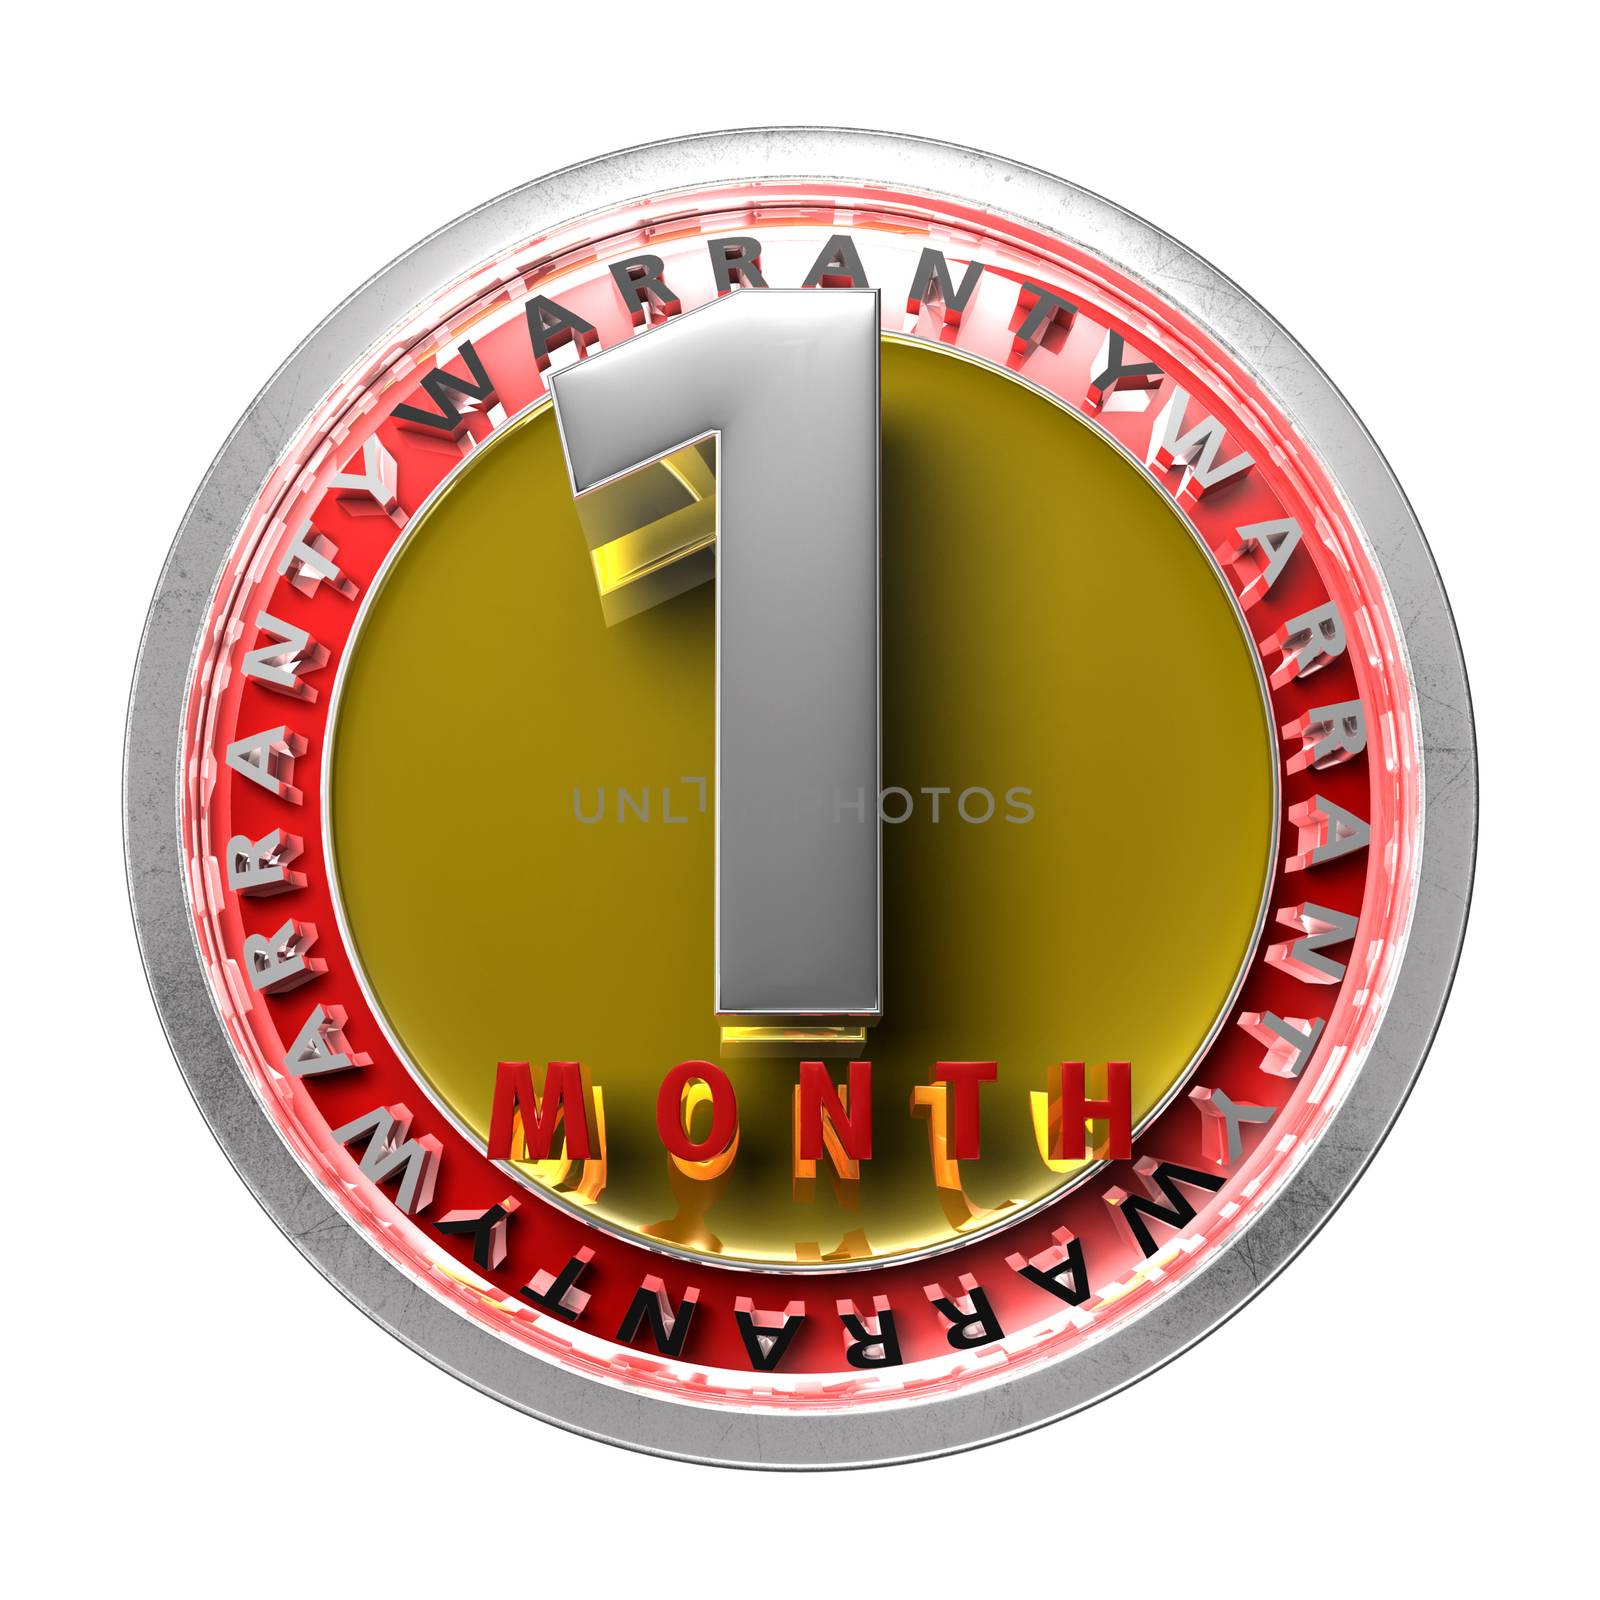 1 month warranty signs 3d. by thitimontoyai